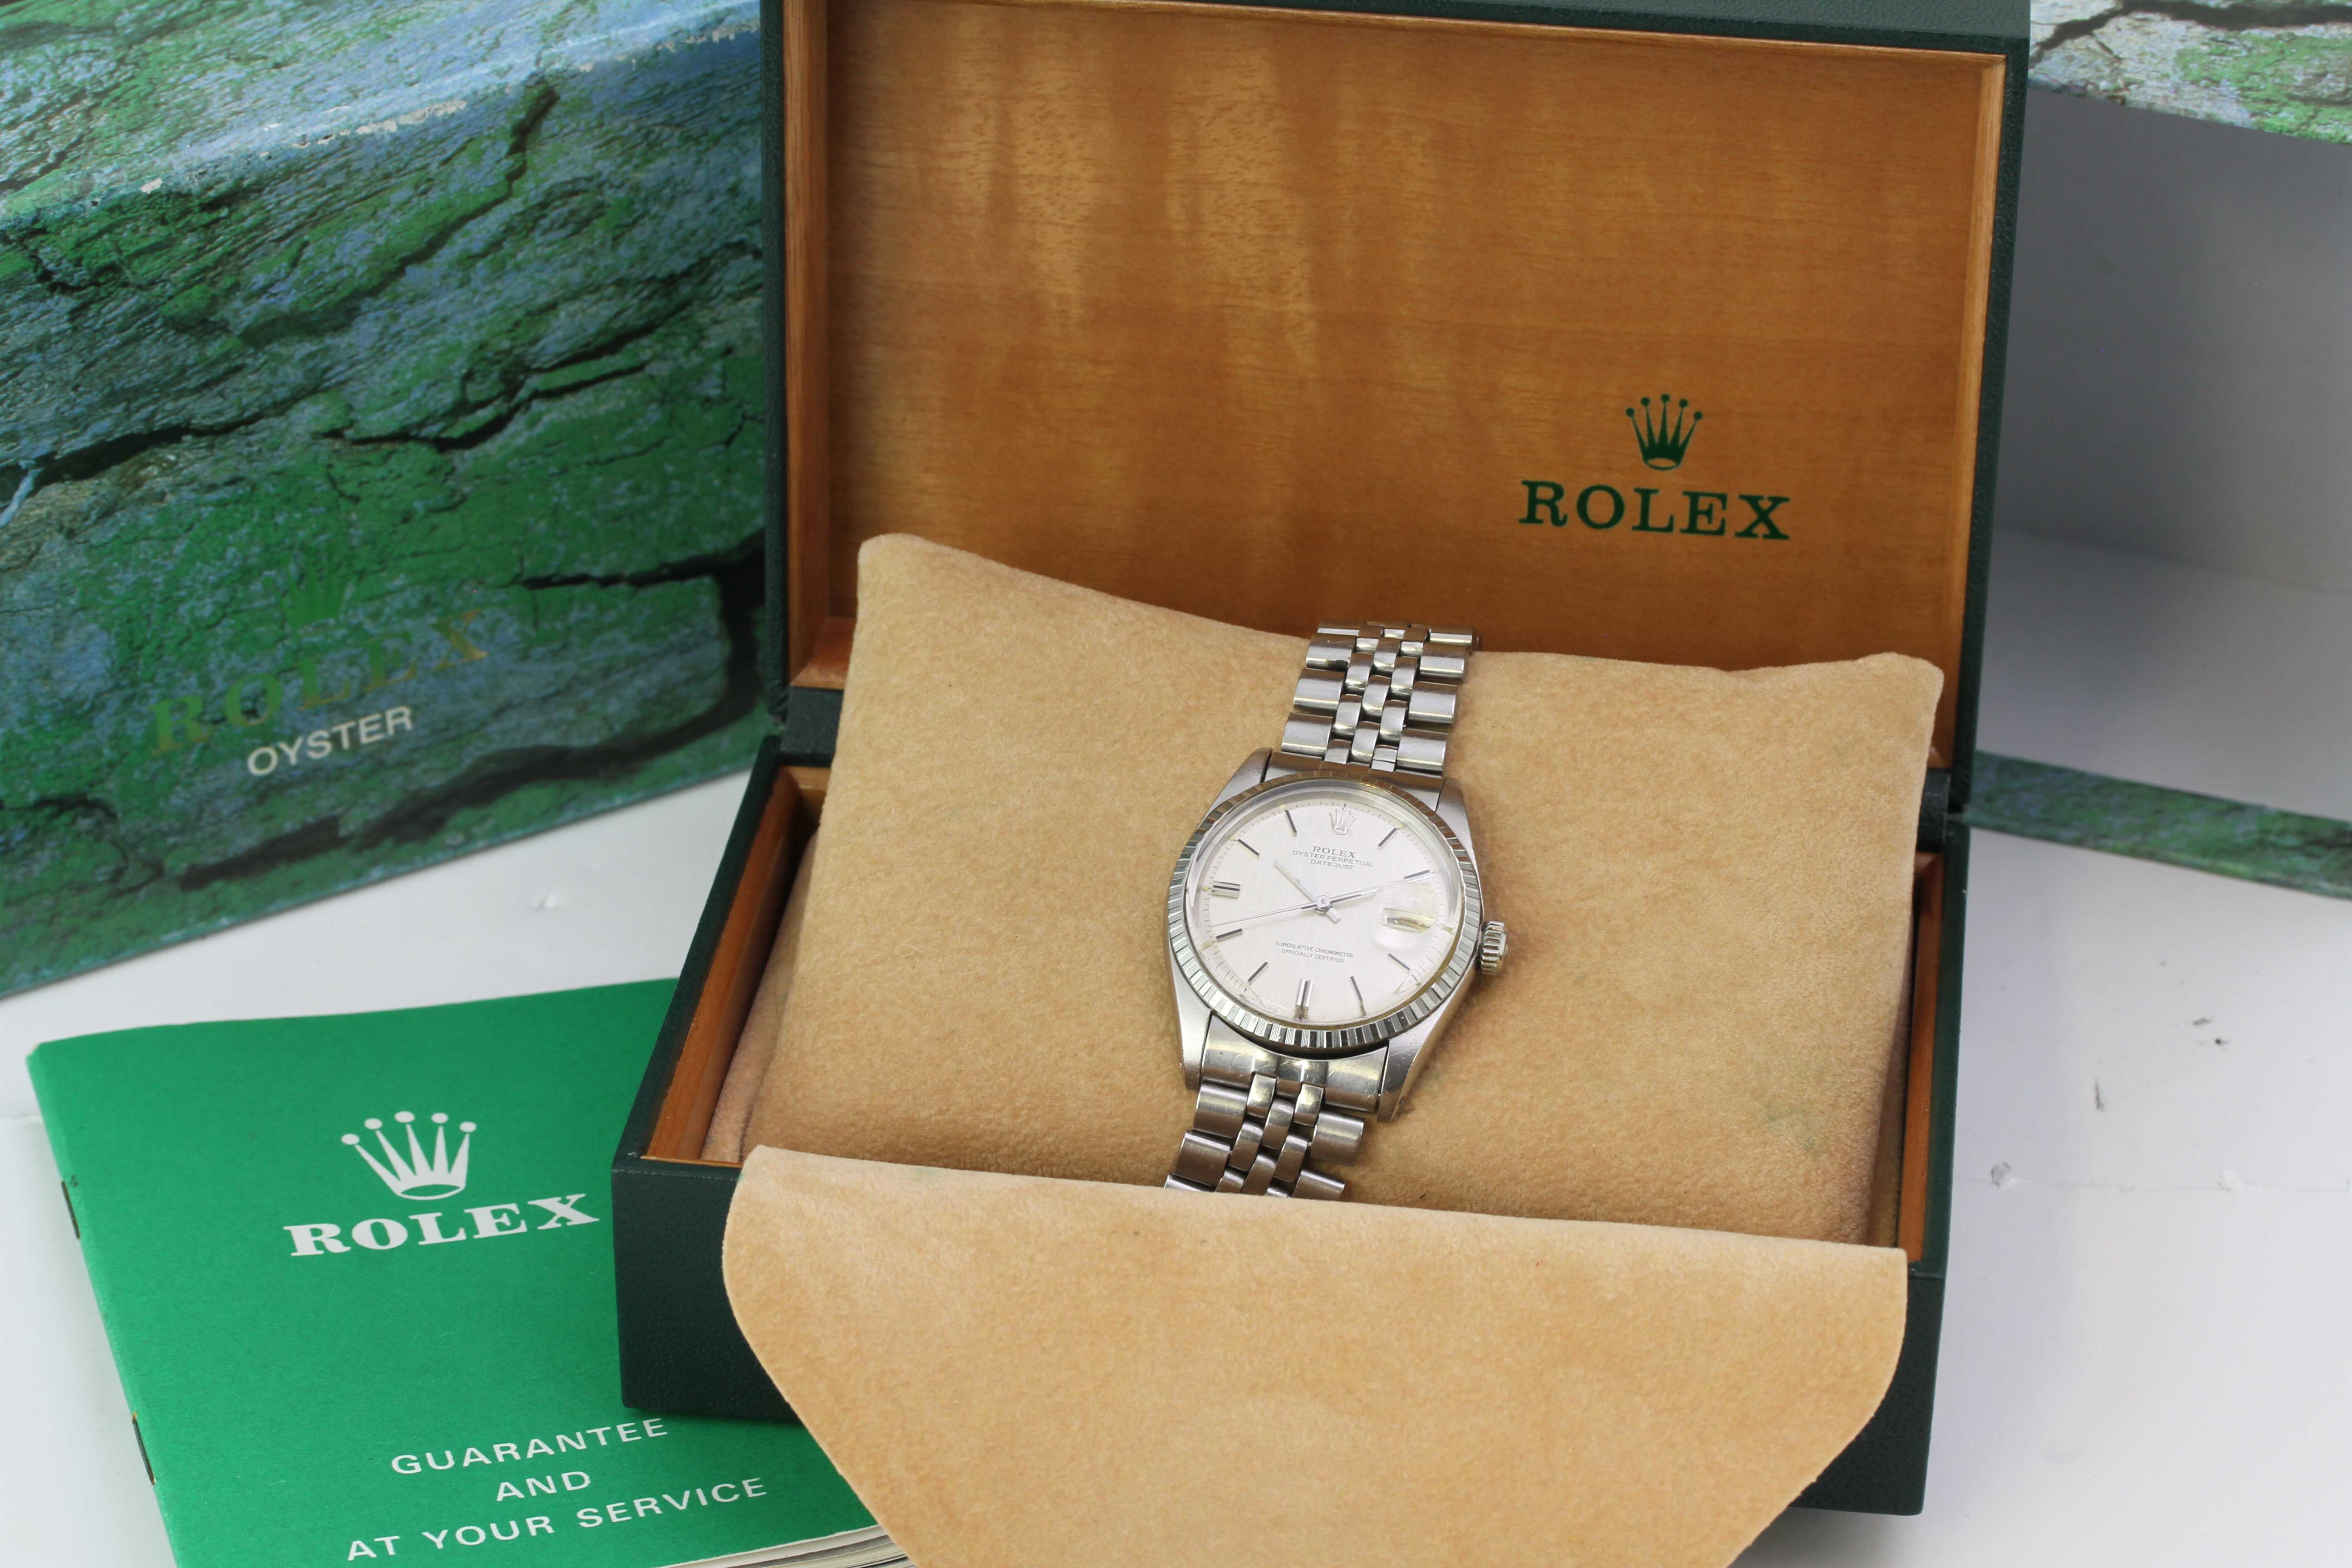 VINTAGE ROLEX DATEJUST LINEN DIAL BOX AND PAPERS 1973 REFERENCE 1603 - Image 2 of 3